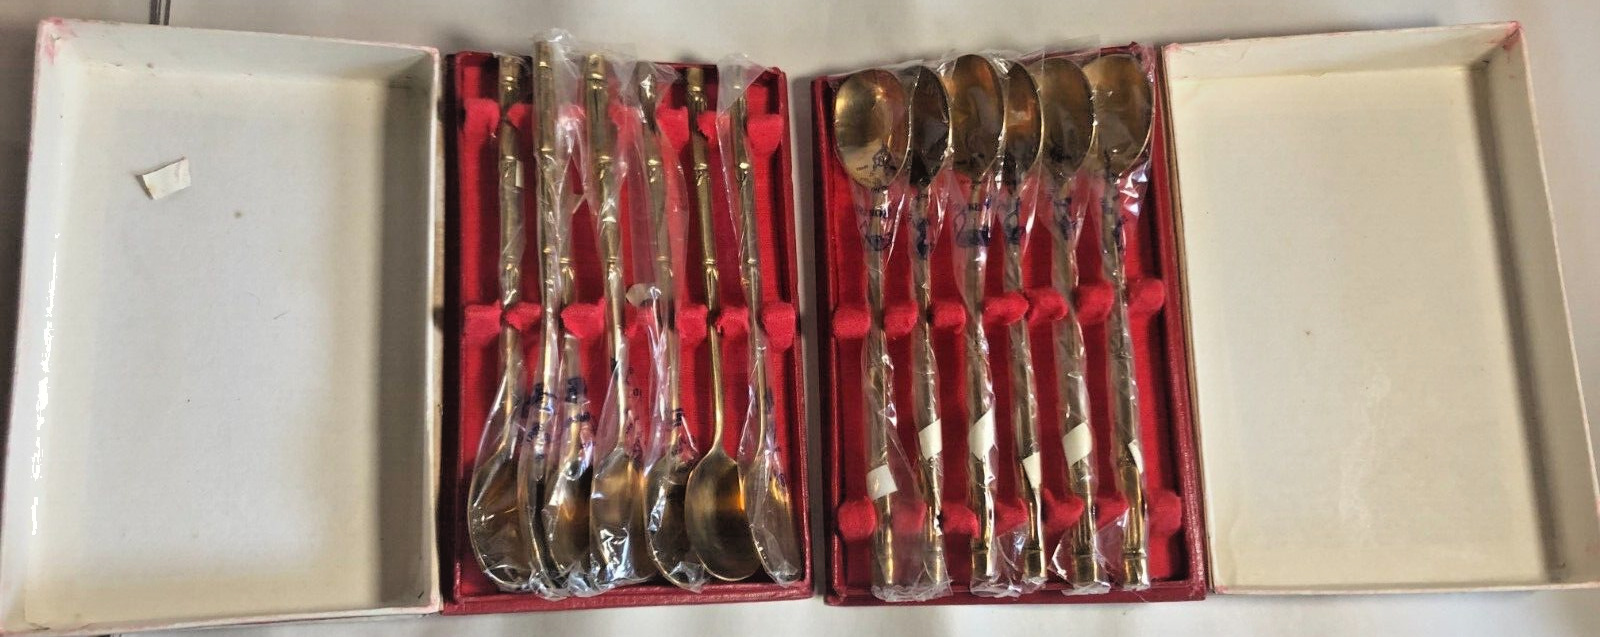 Lot of 13 Thailand Solid Pure Nickel Bronze Flatware Spoons Never Used